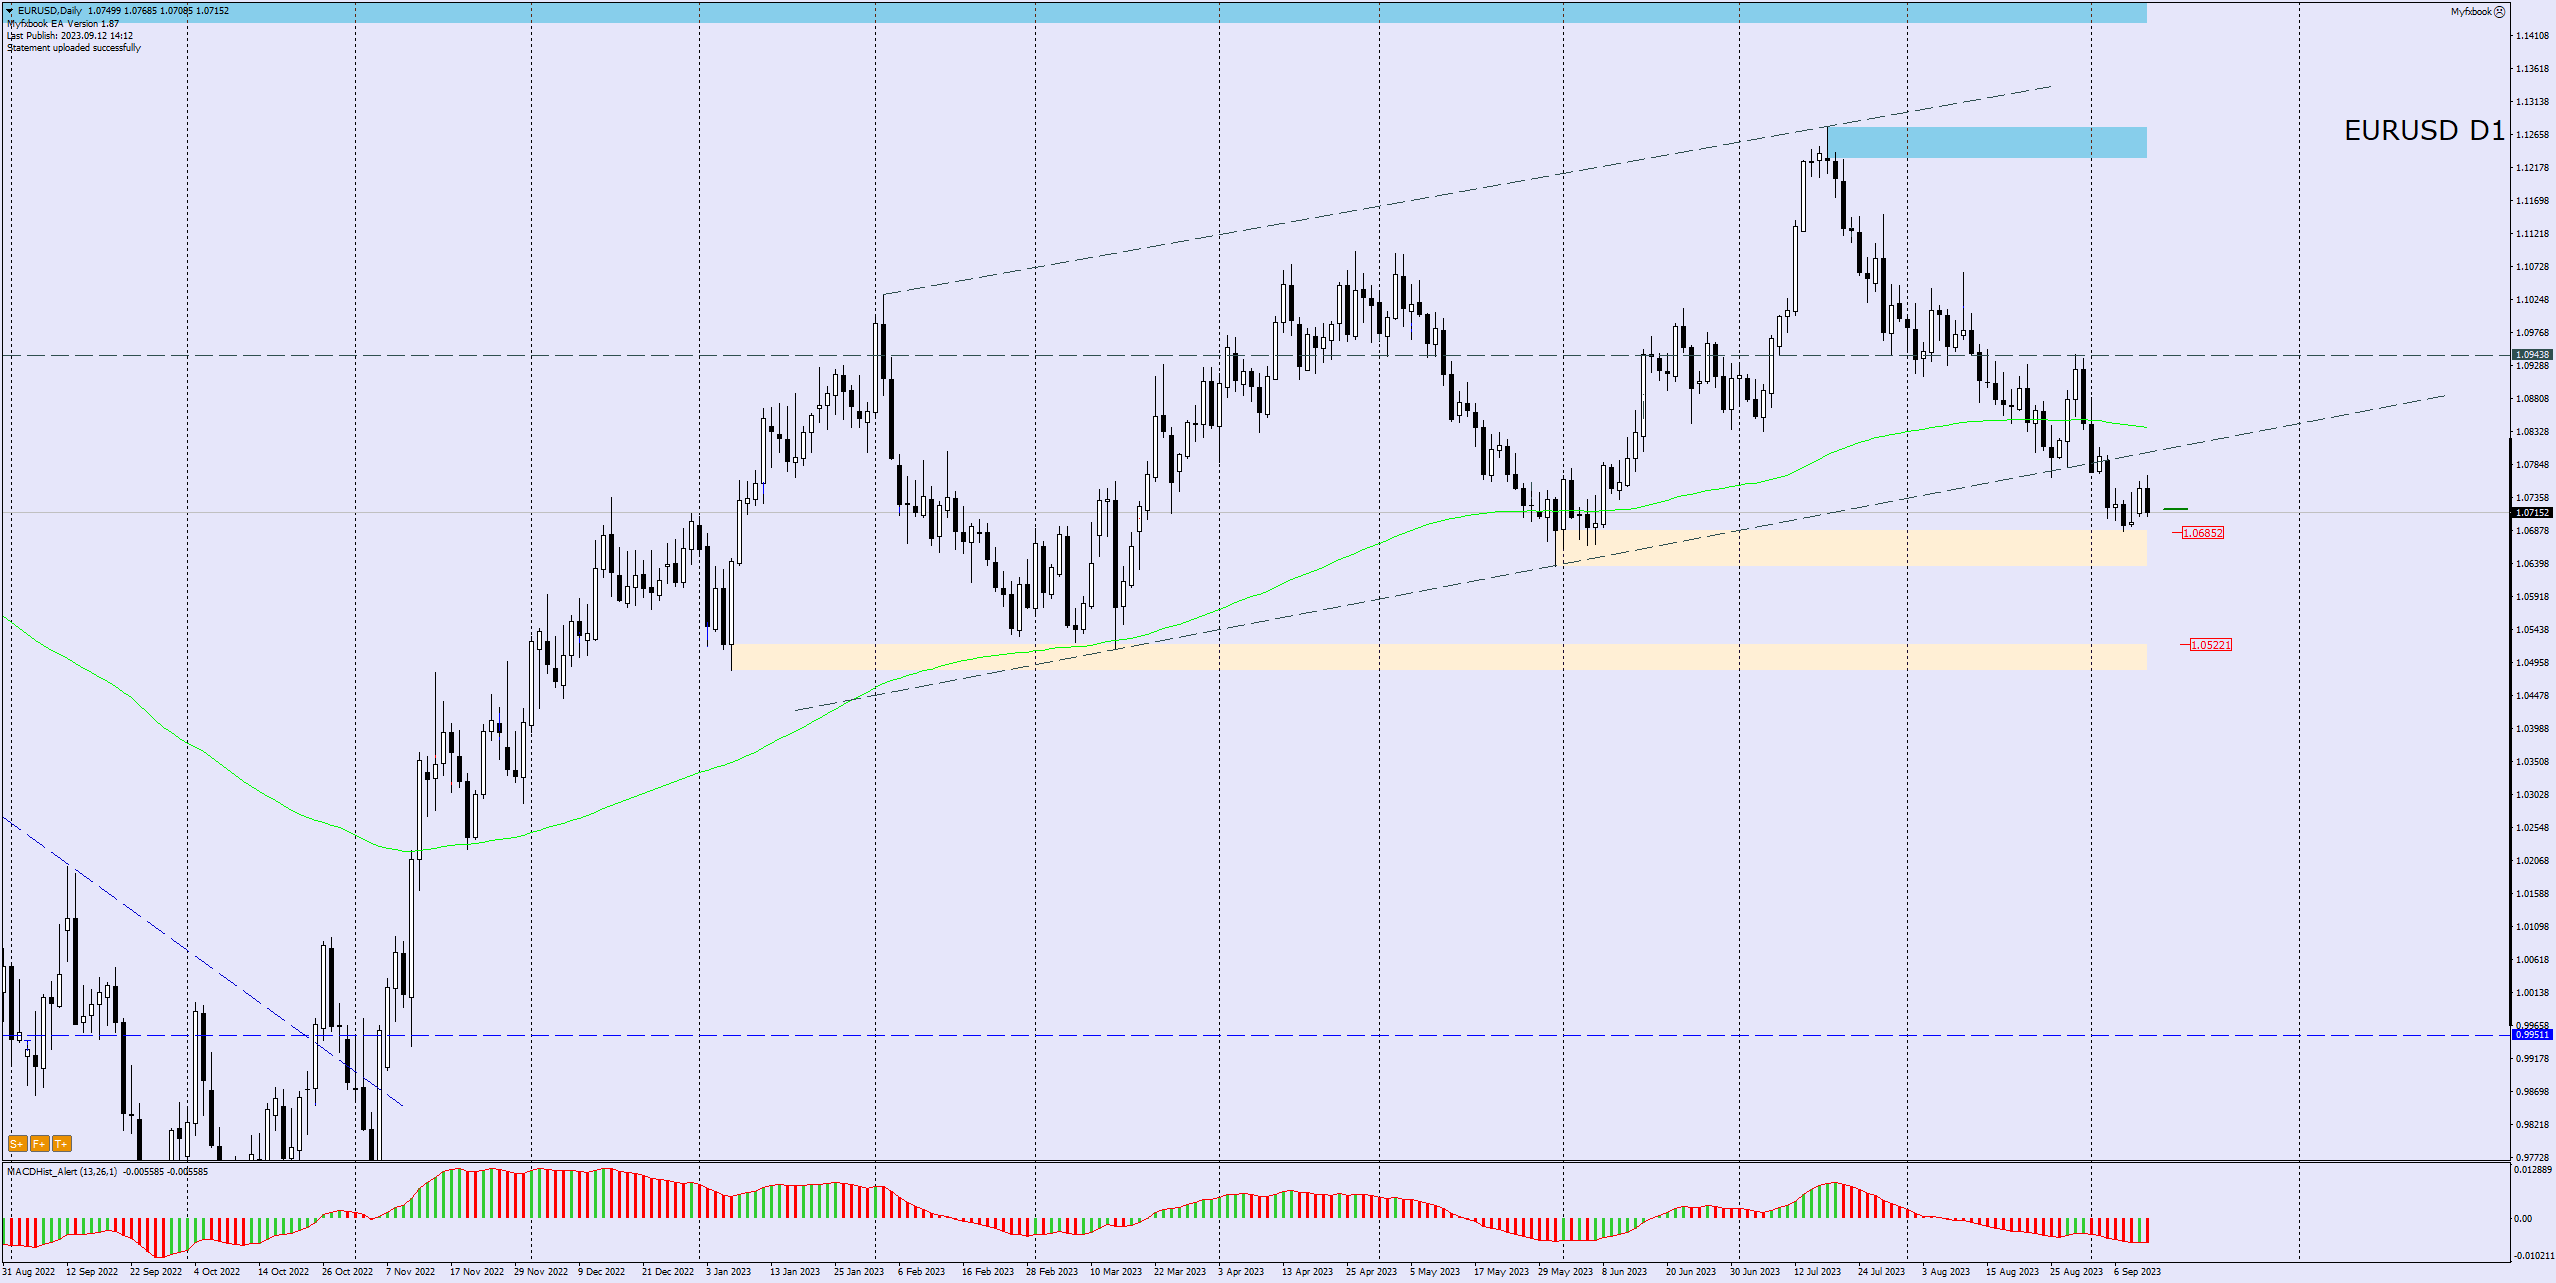 eurusd daily before the ECB decision